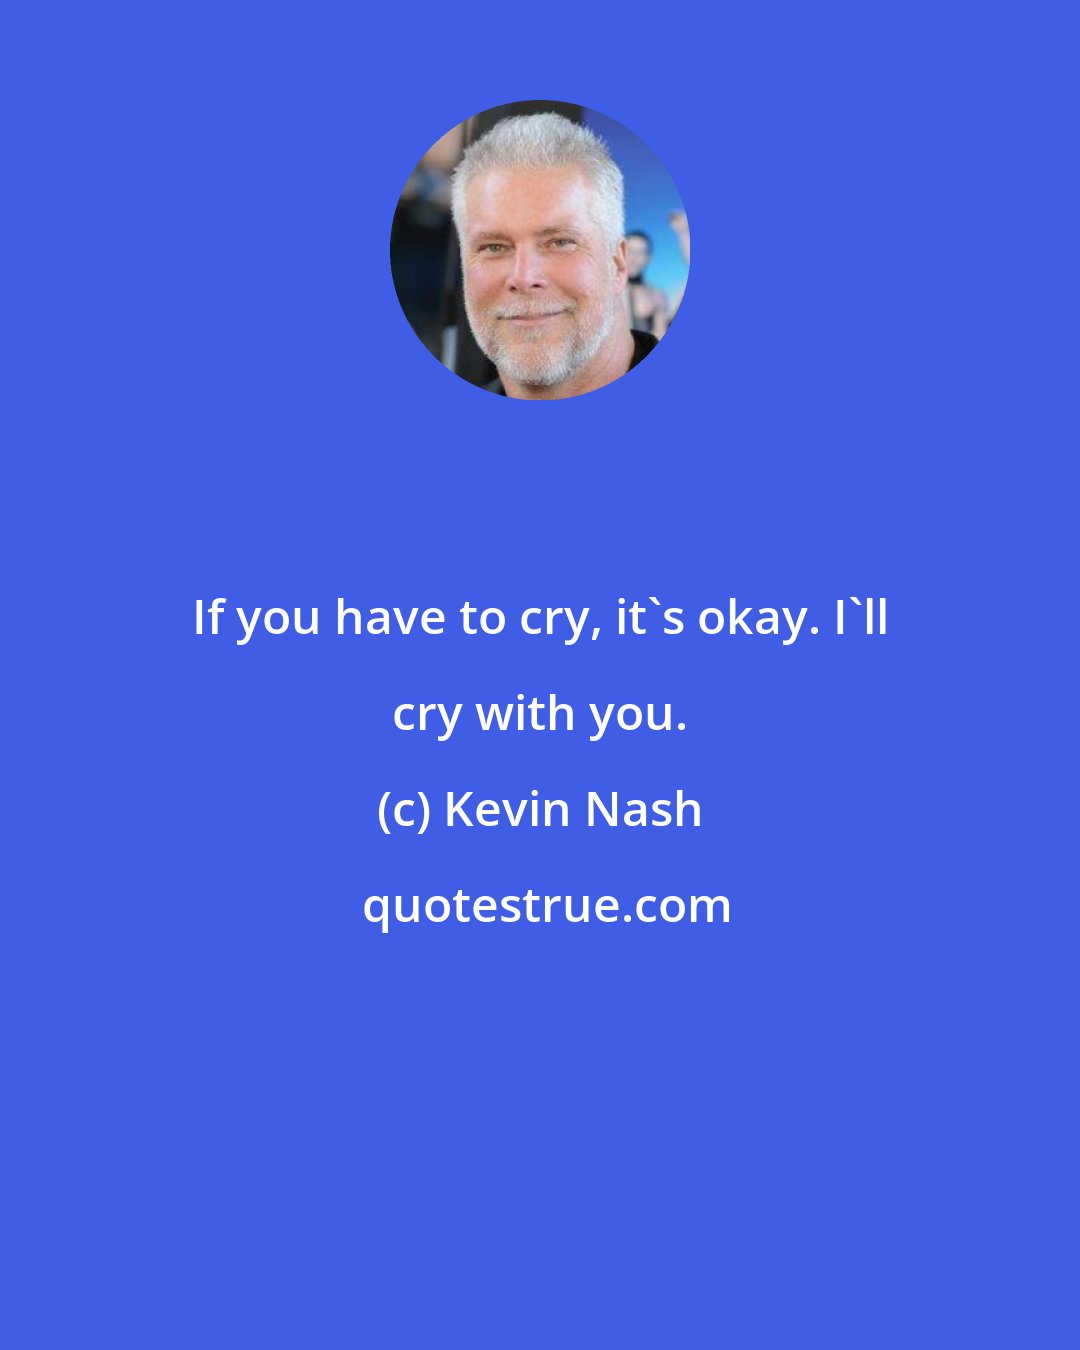 Kevin Nash: If you have to cry, it's okay. I'll cry with you.